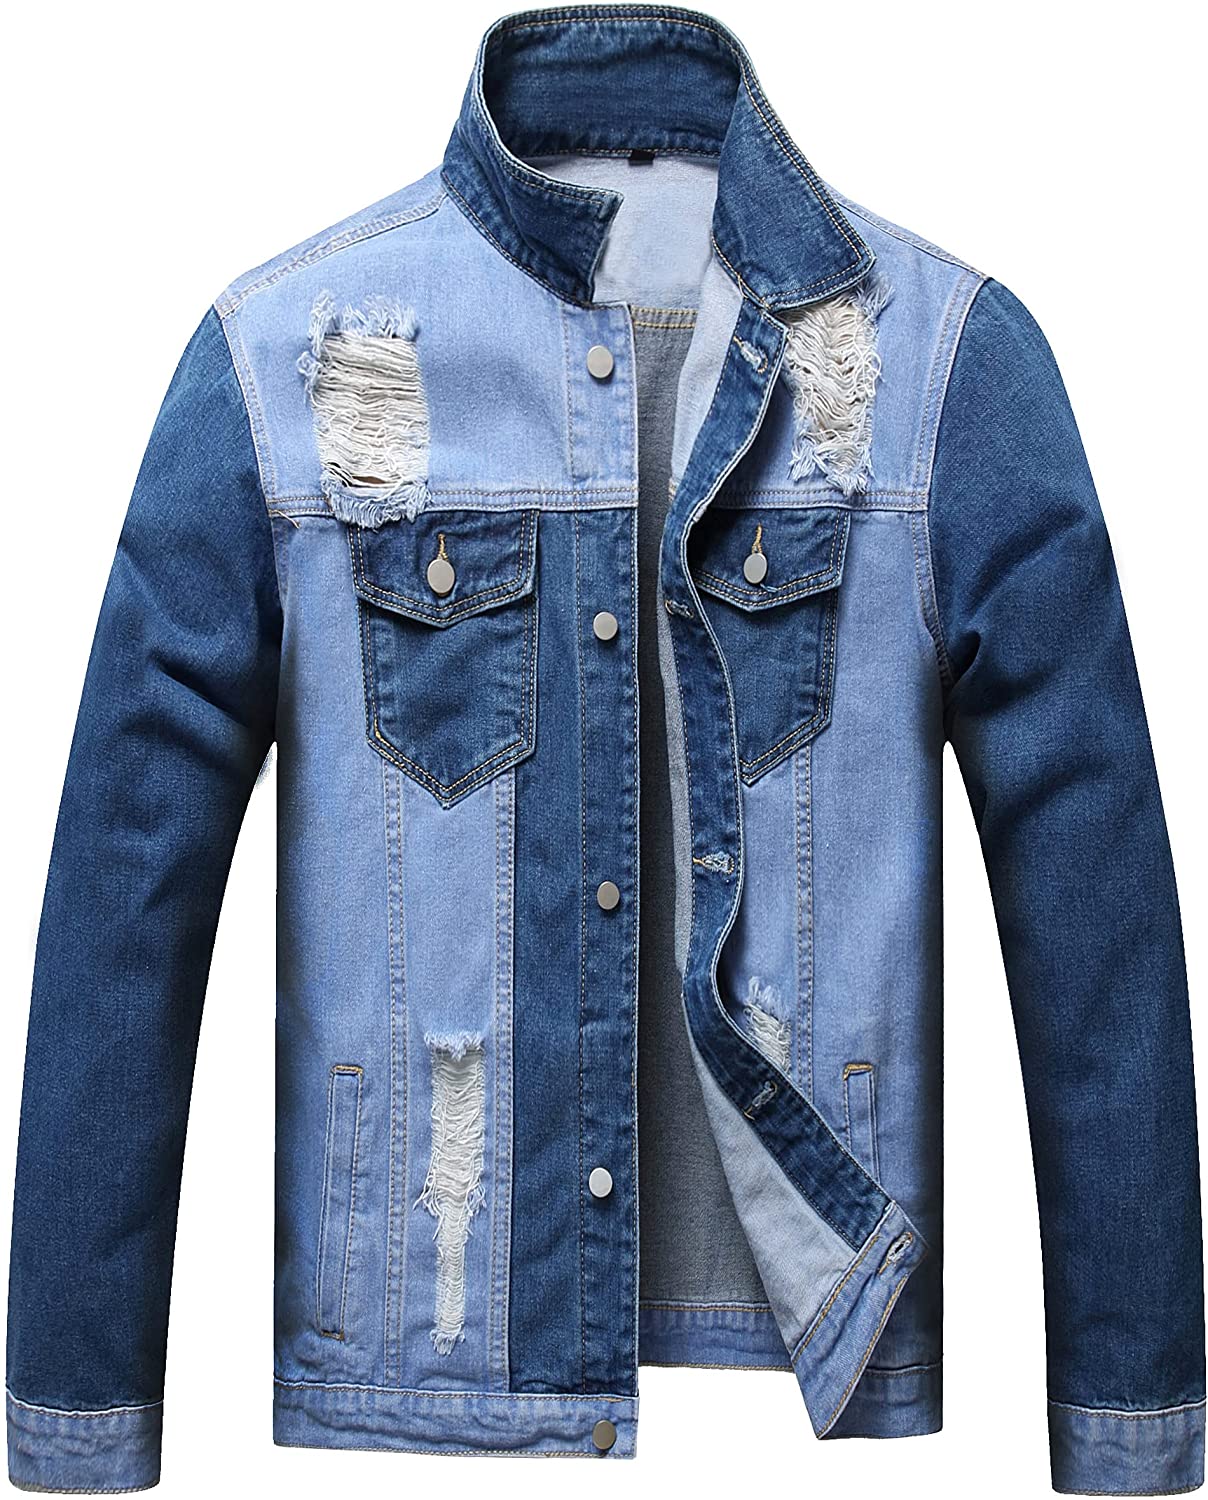 JSACYTF Men’s Denim Jacket,Classic Ripped Jean Jacket for Men with Holes